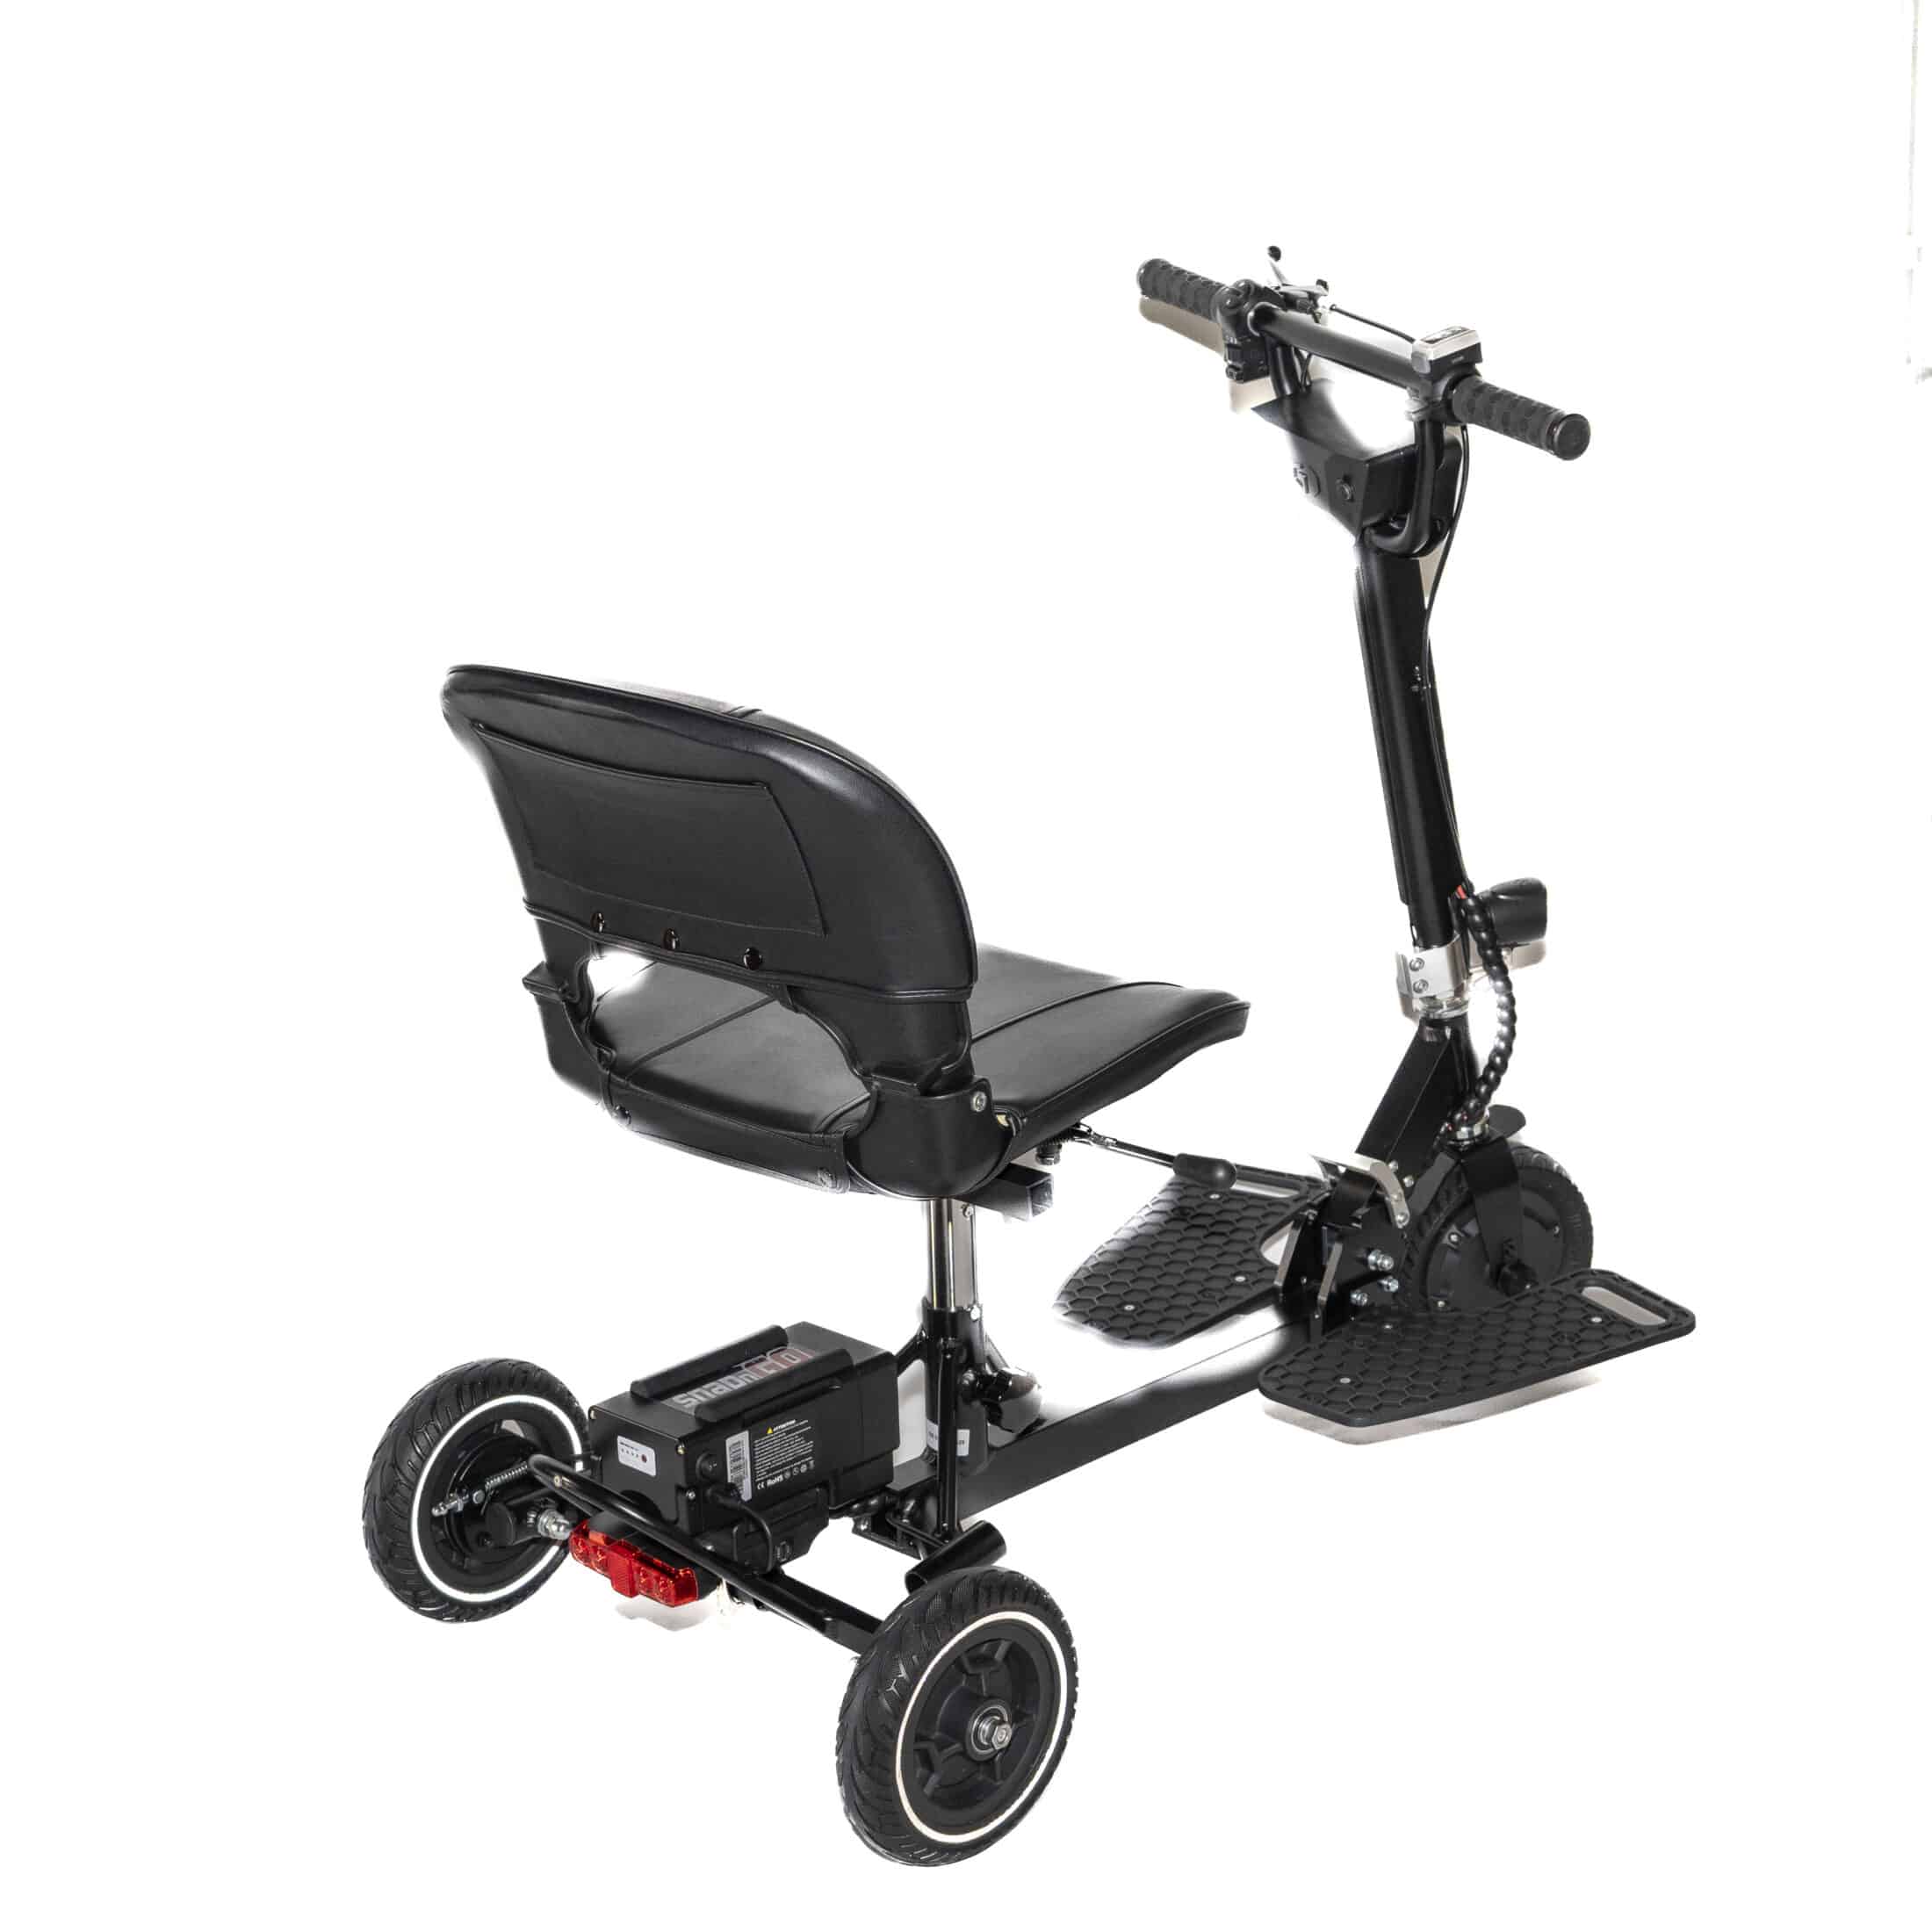 Glion SNAPnGO Folding Travel Mobility Scooter S335.1 Sport Edition